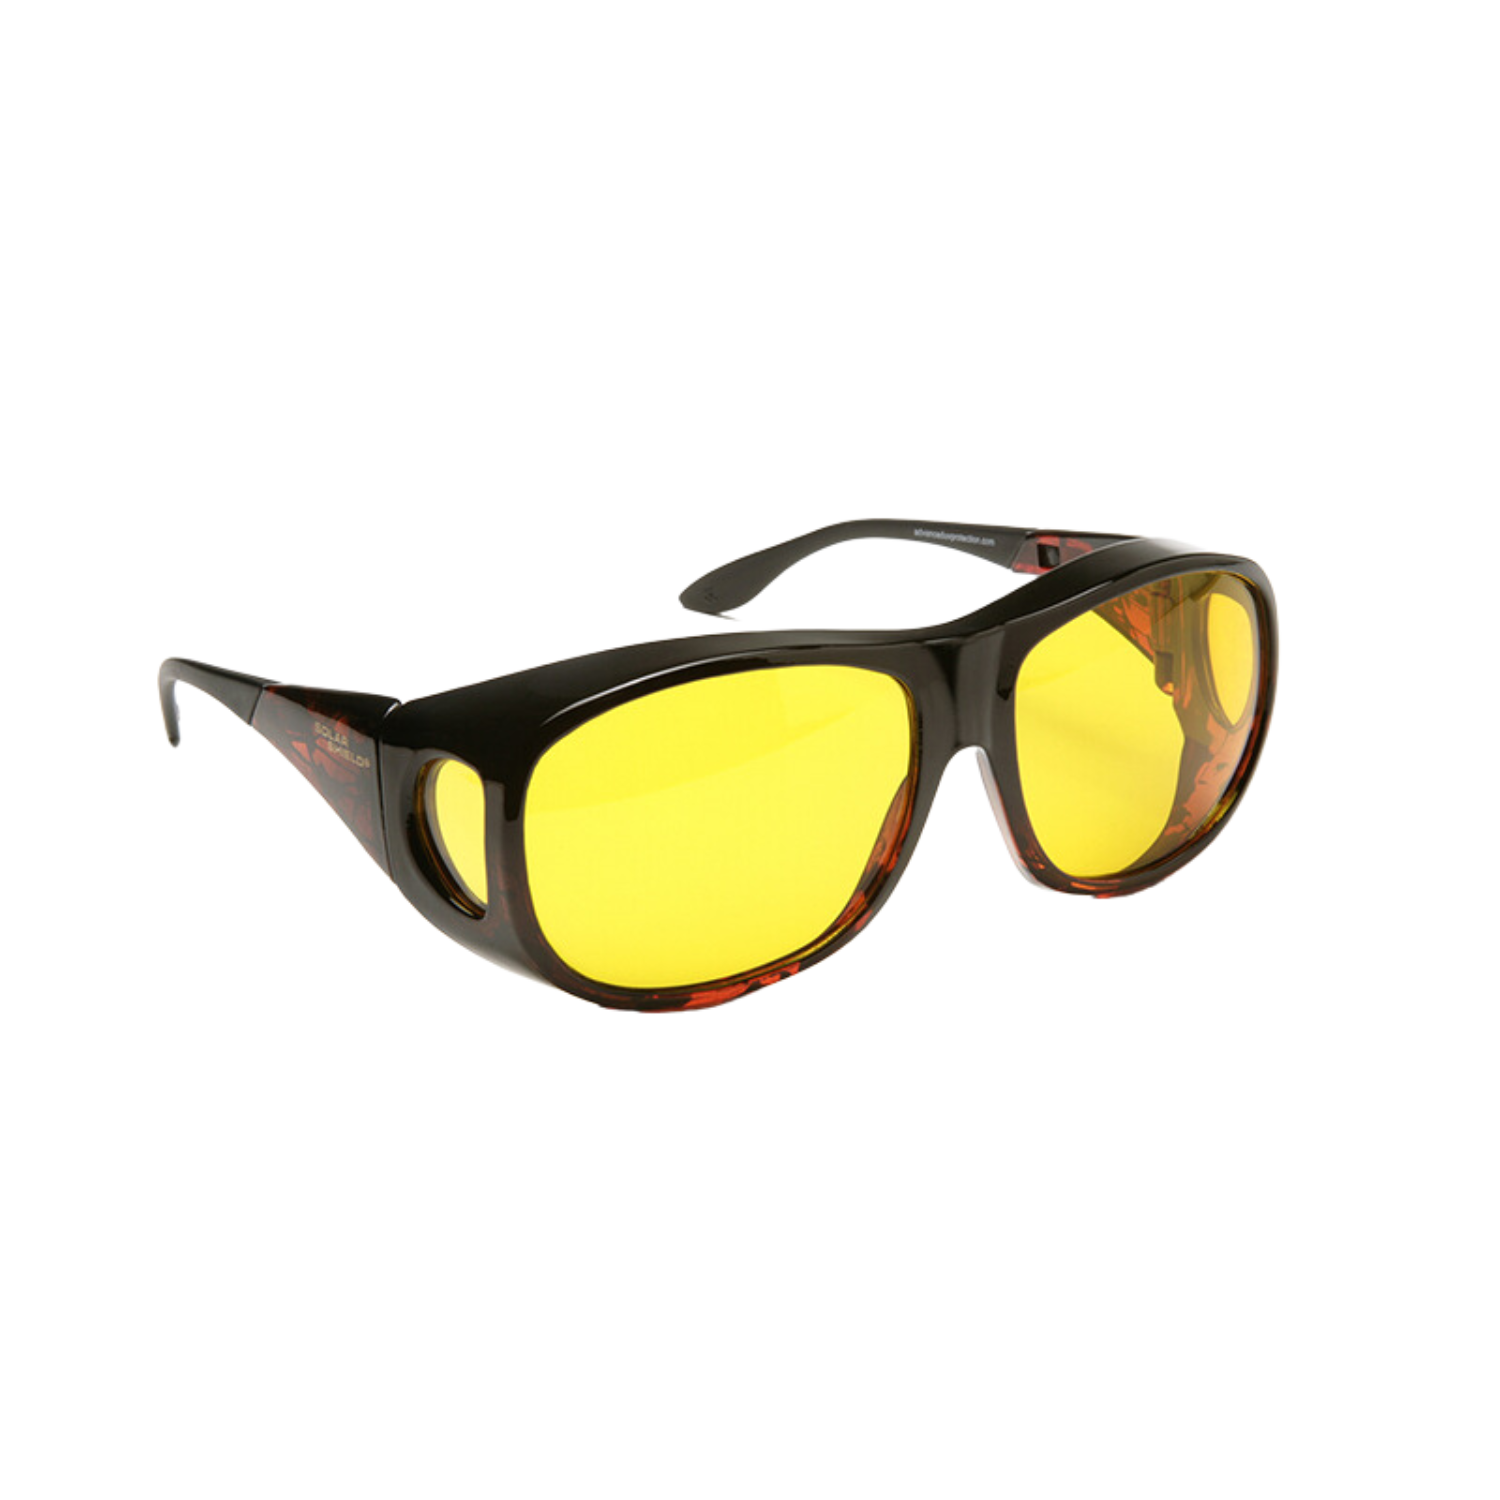 Image of the Eschenbach Solar Shield® Blue Light Filtering Sunglasses with Yellow Tint.